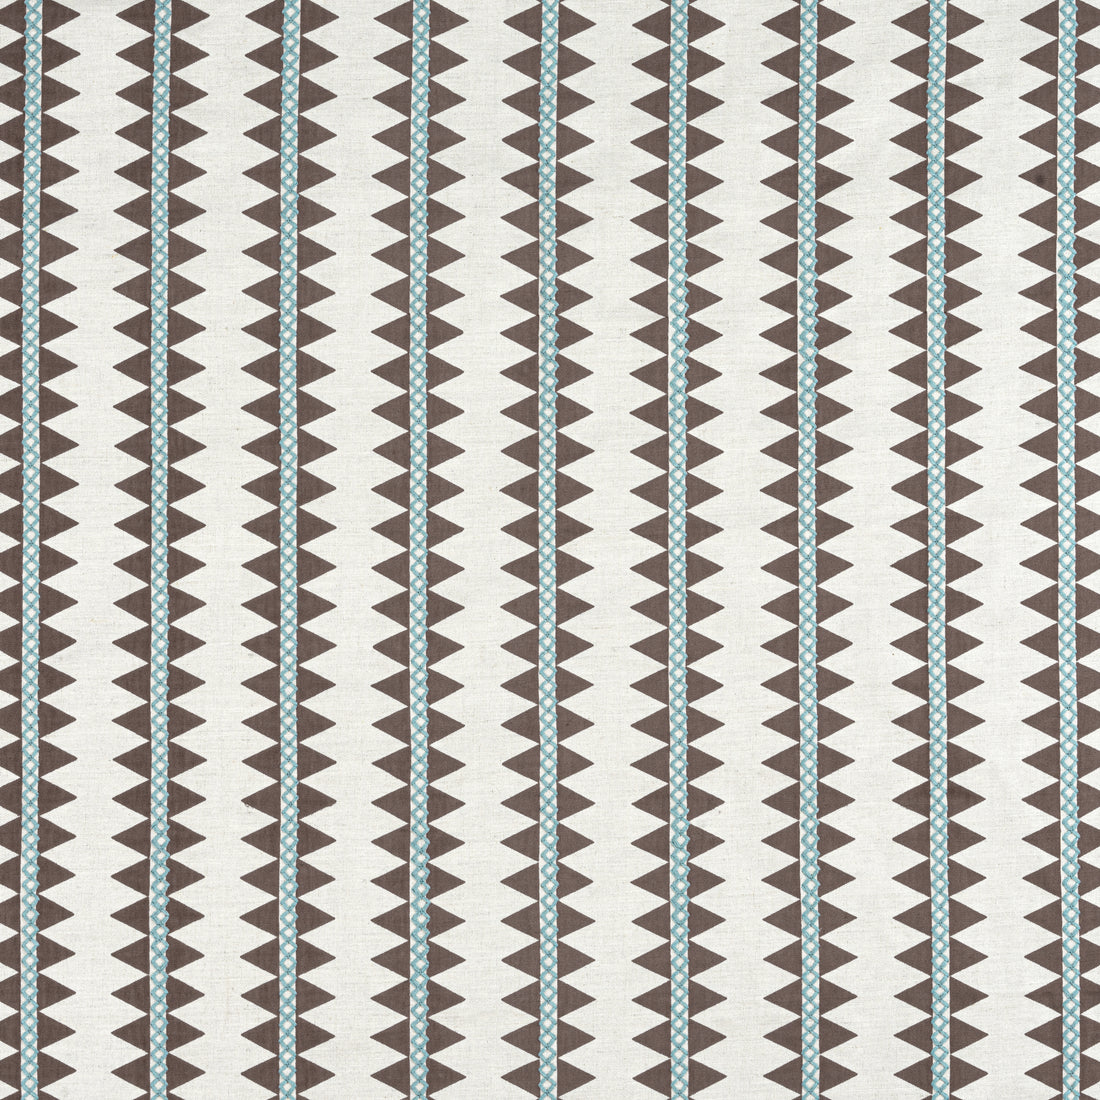 Reno Stripe Embroidery fabric in brown color - pattern number W713246 - by Thibaut in the Mesa Fabrics collection